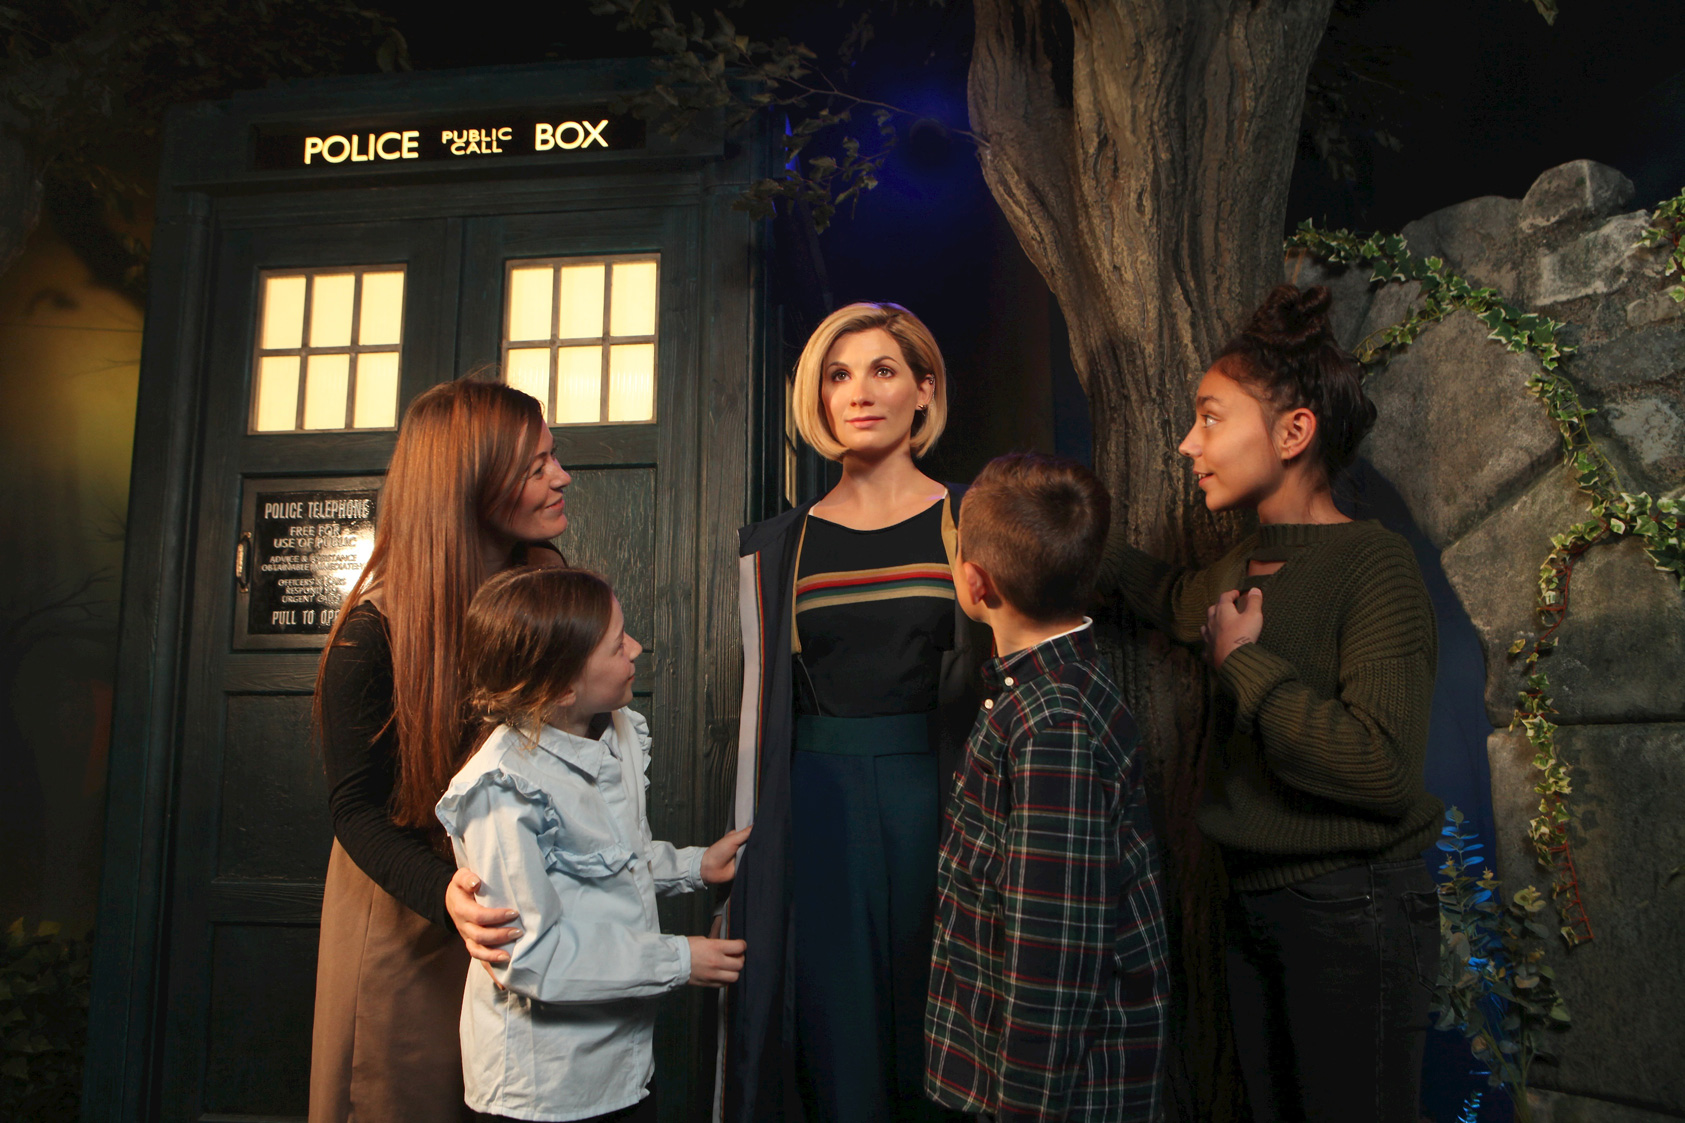 Guests visiting the Dr. Who wax figure at Madame Tussauds Blakcpool